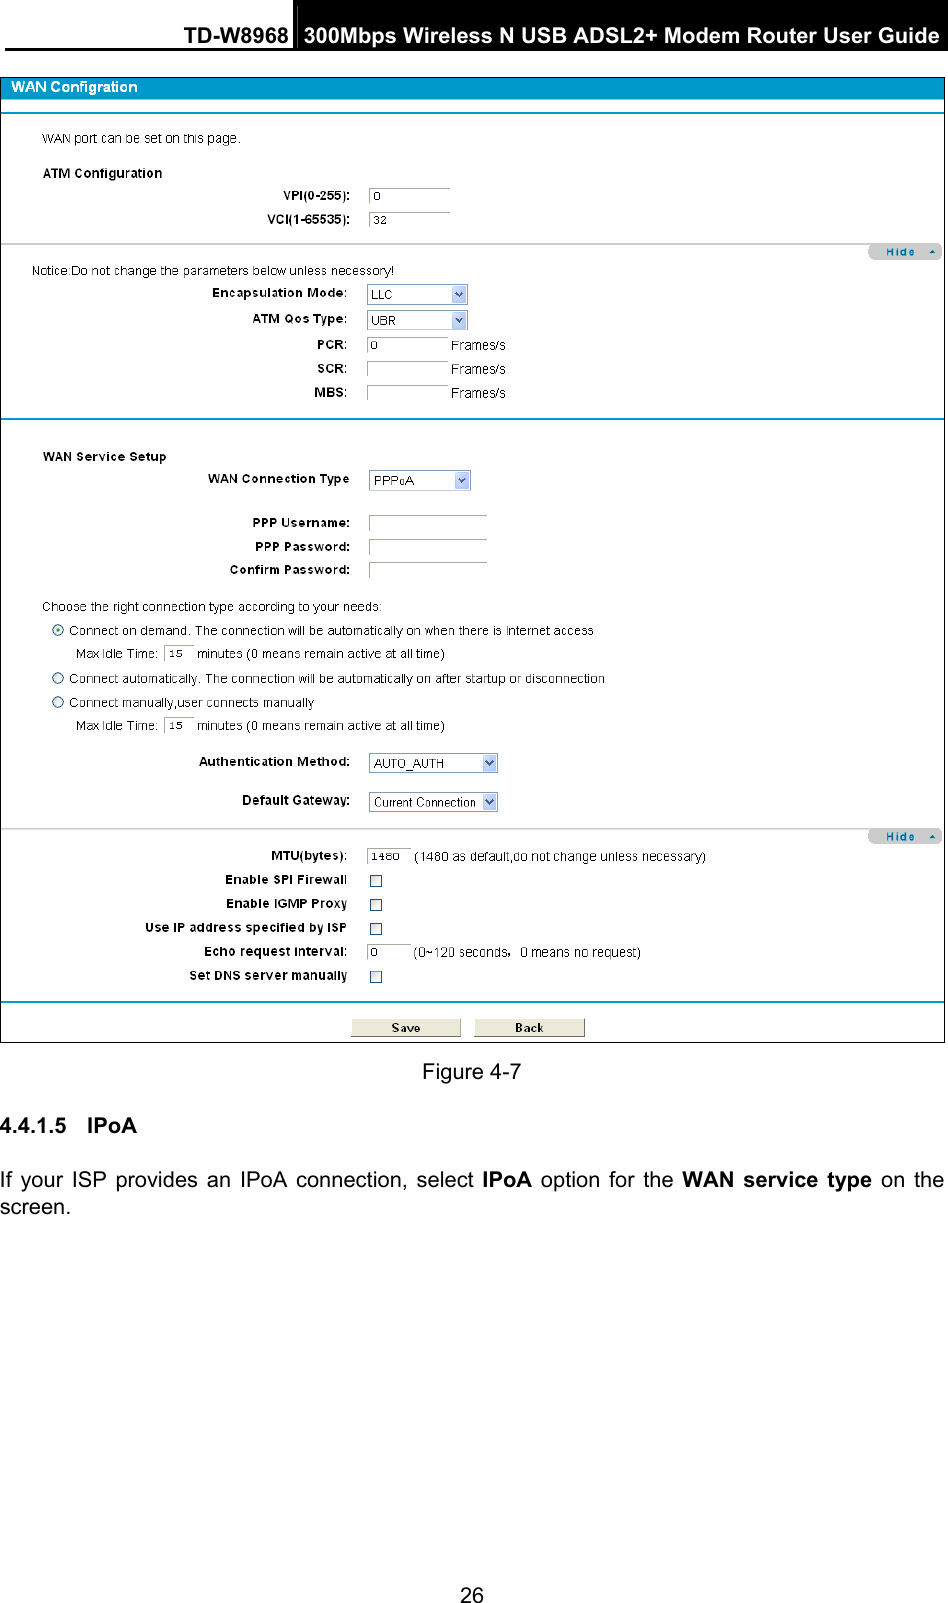 TD-W8968  300Mbps Wireless N USB ADSL2+ Modem Router User Guide 26  Figure 4-7 4.4.1.5  IPoA  If your ISP provides an IPoA connection, select IPoA option for the WAN service type on the screen. 